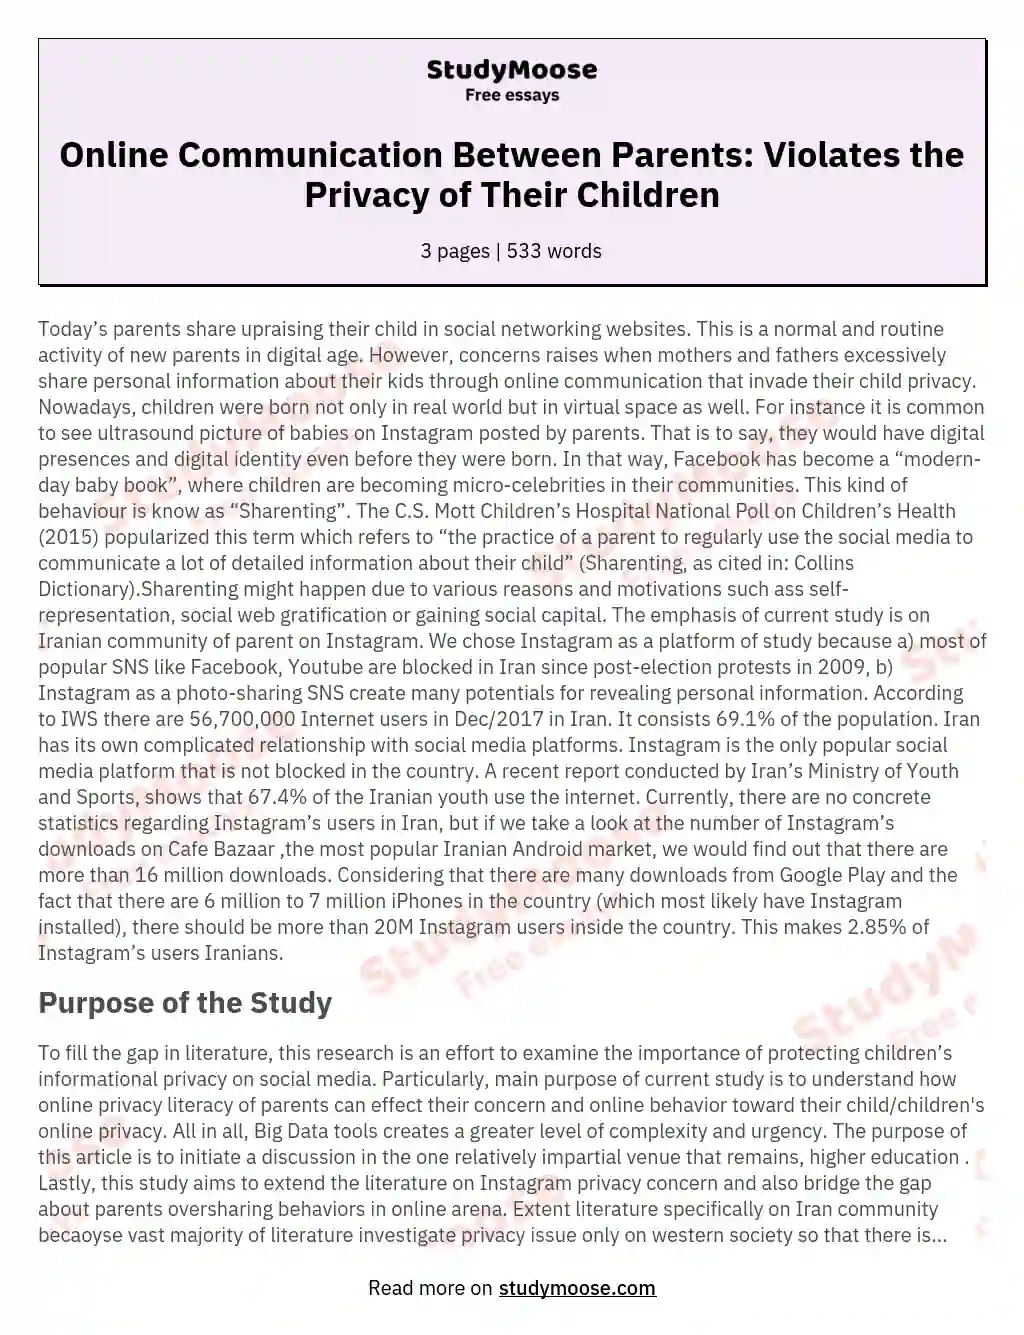 Online Communication Between Parents: Violates the Privacy of Their Children essay